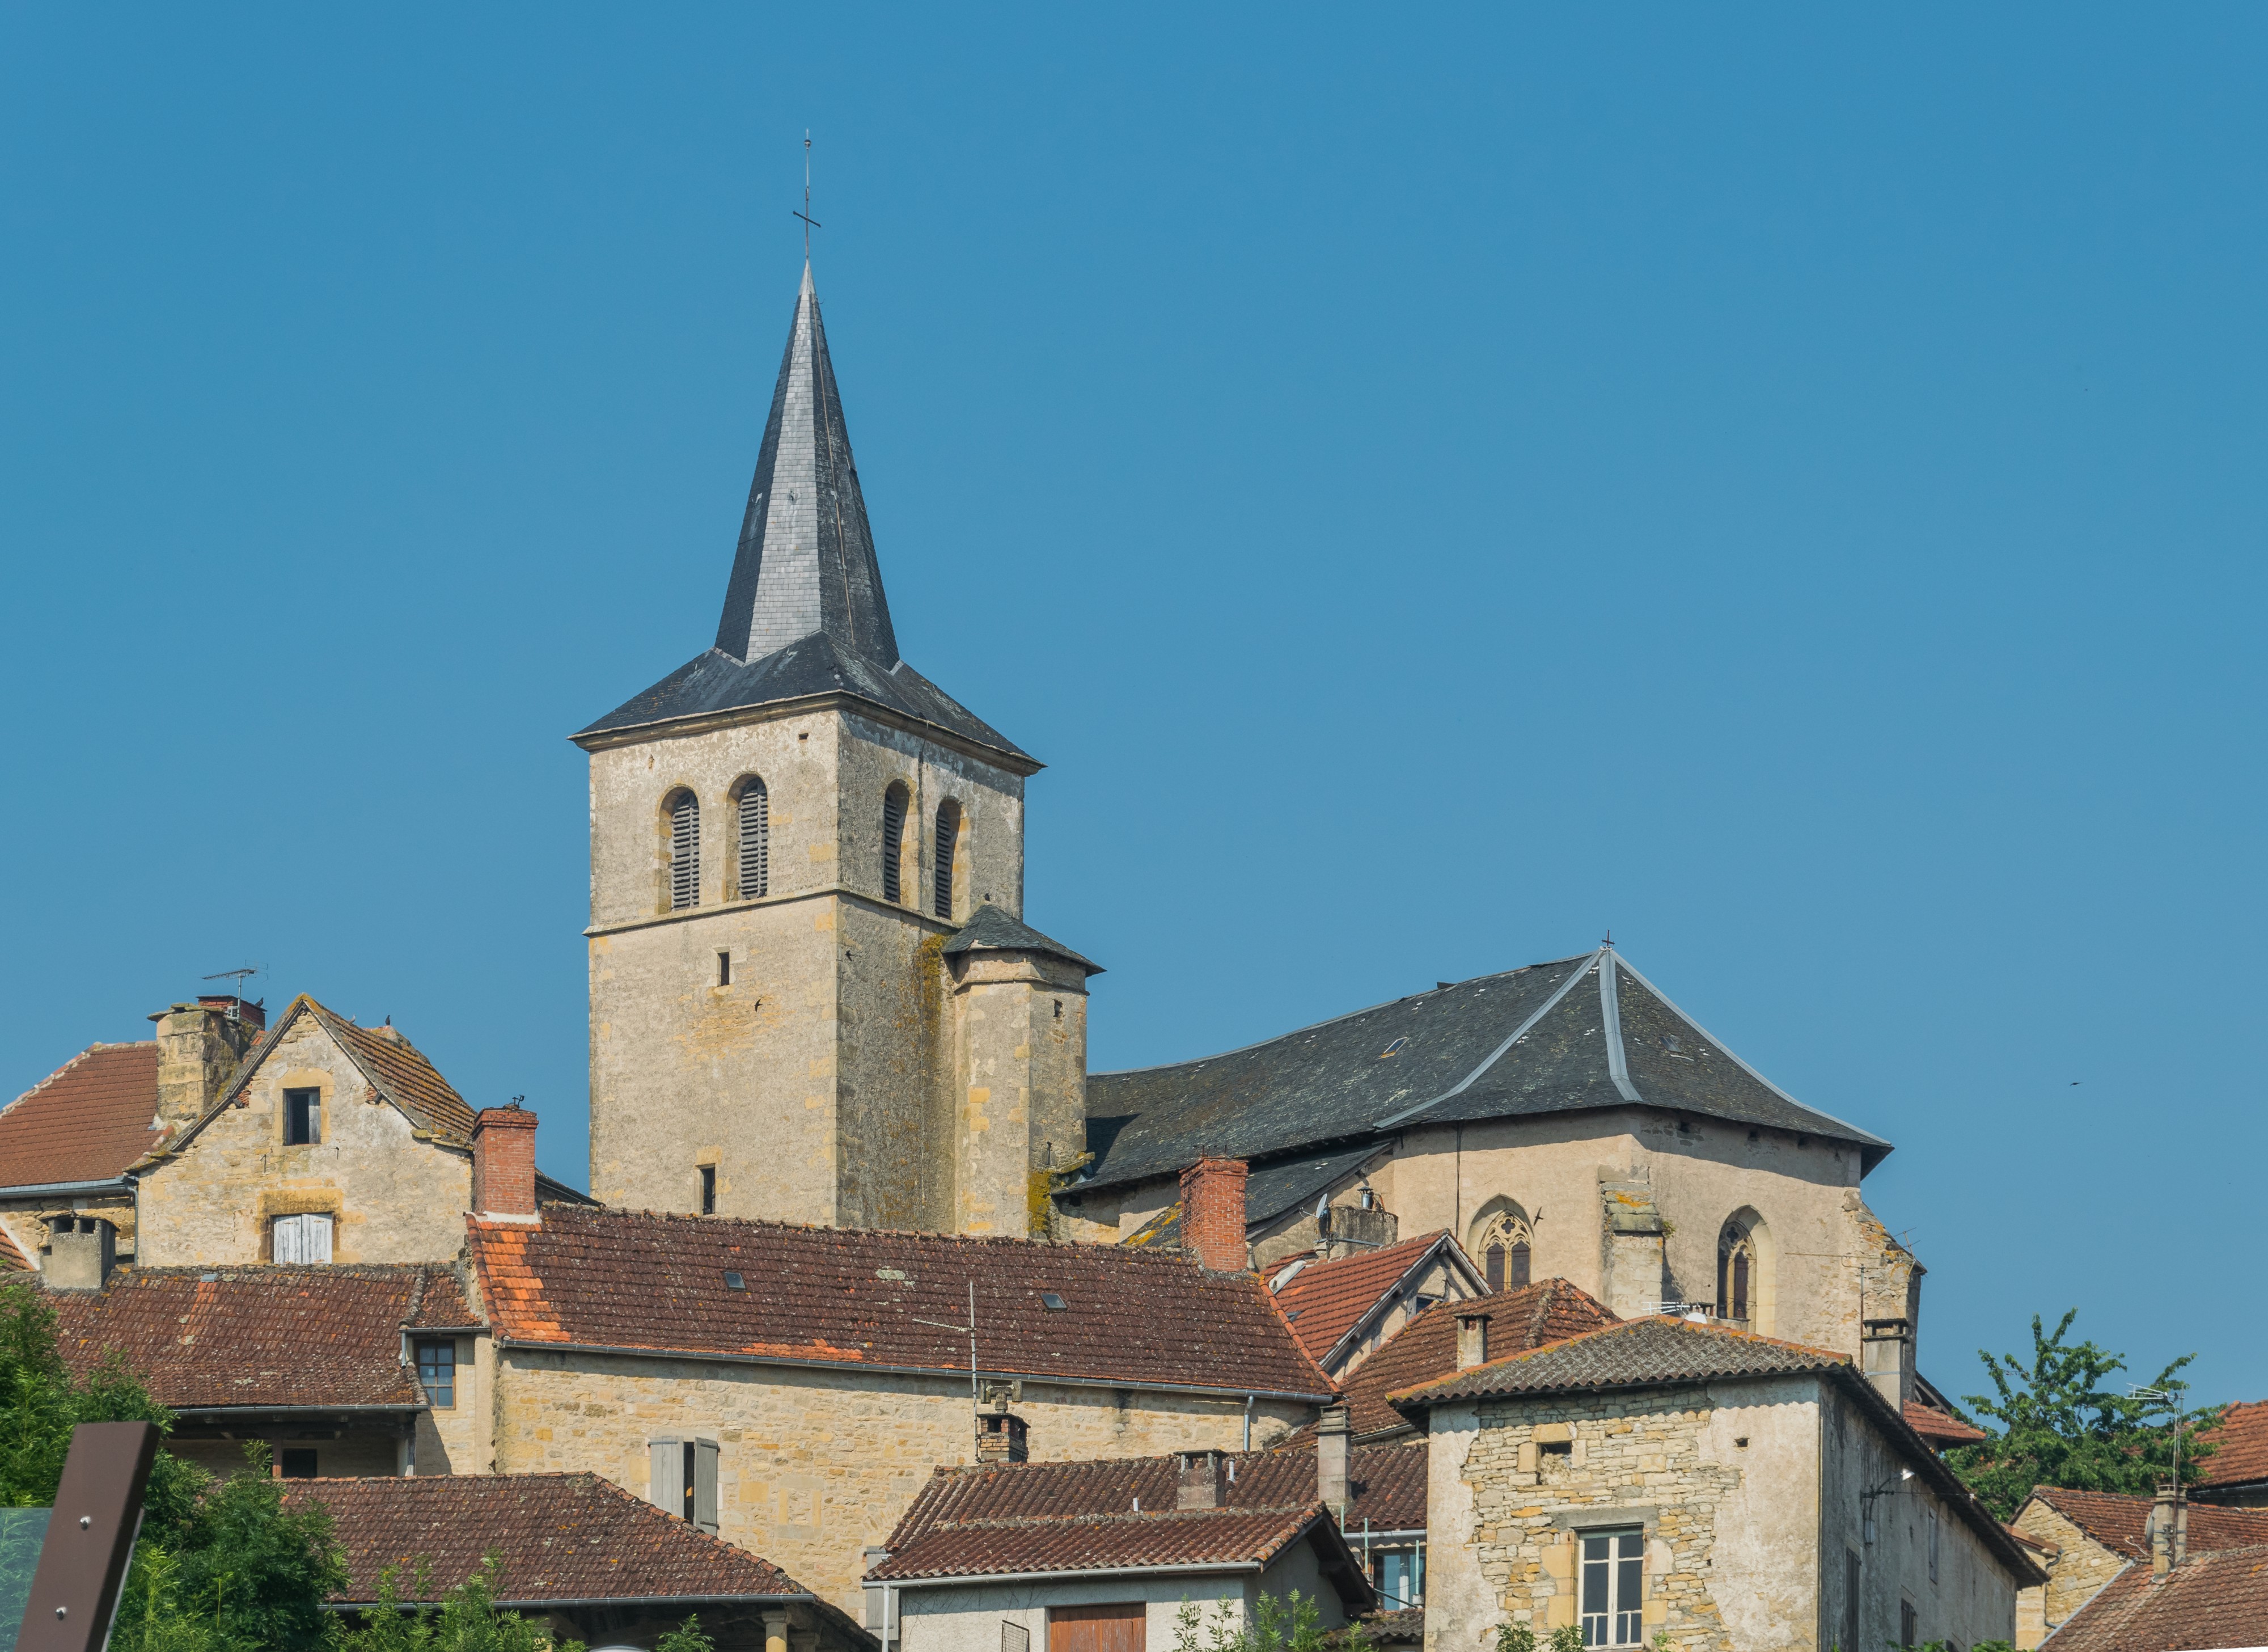 Saint-Andeol Church towering over town of Parisot